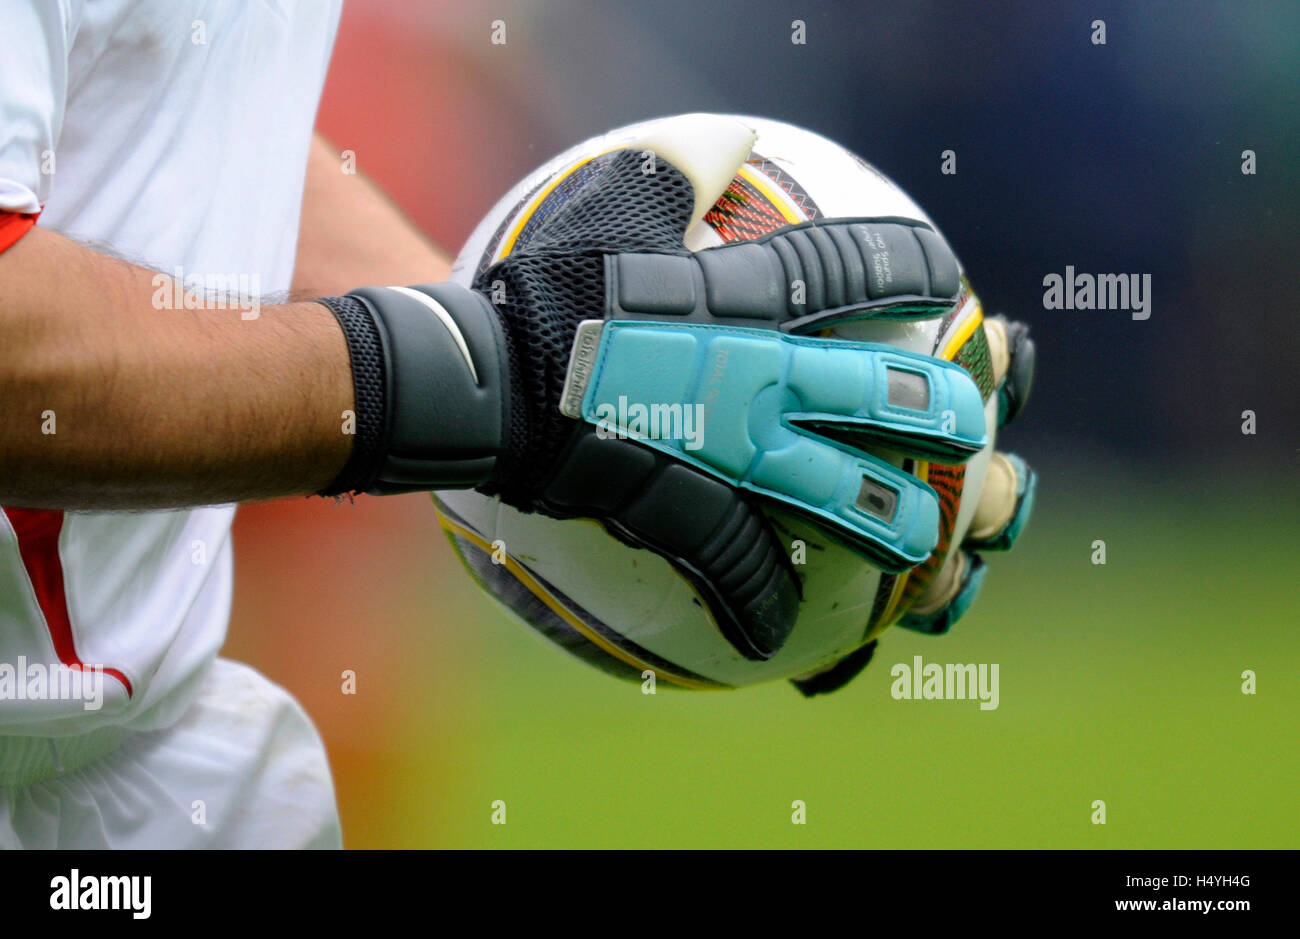 Jabulani, Adidas World Cup ball, in the hands of a goalkeeper Stock Photo